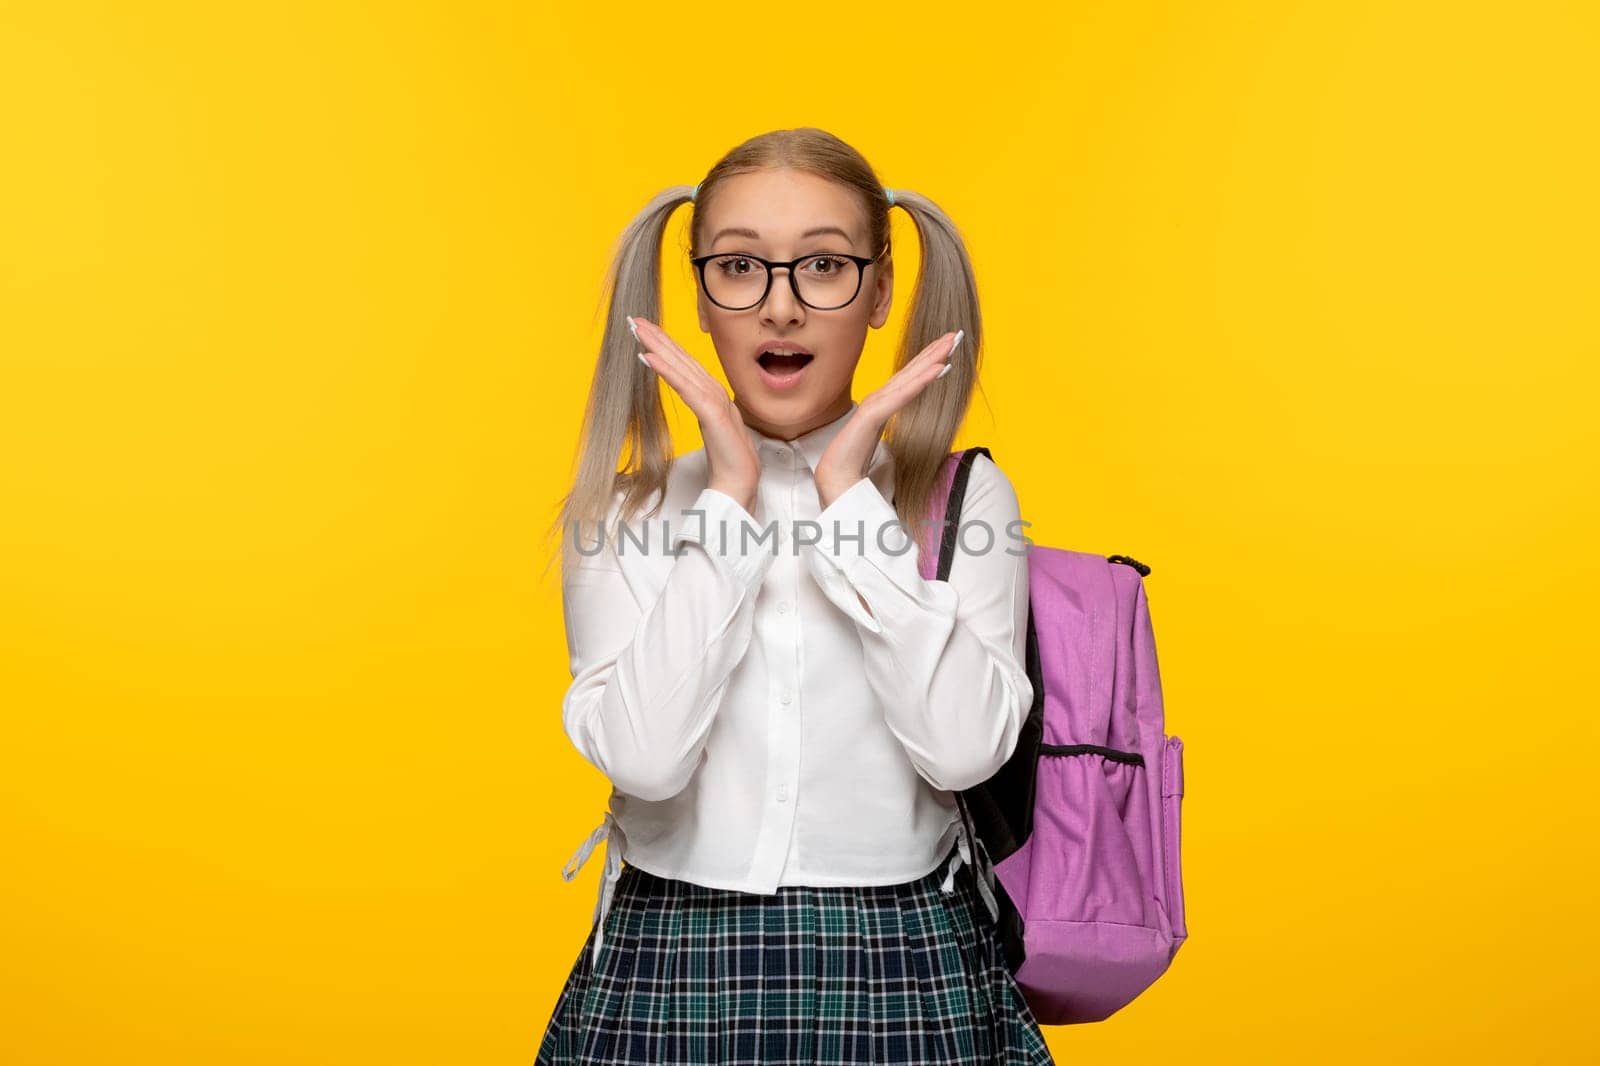 world book day surprised schoolgirl with ponytails hands under chin on yellow background by Kamran